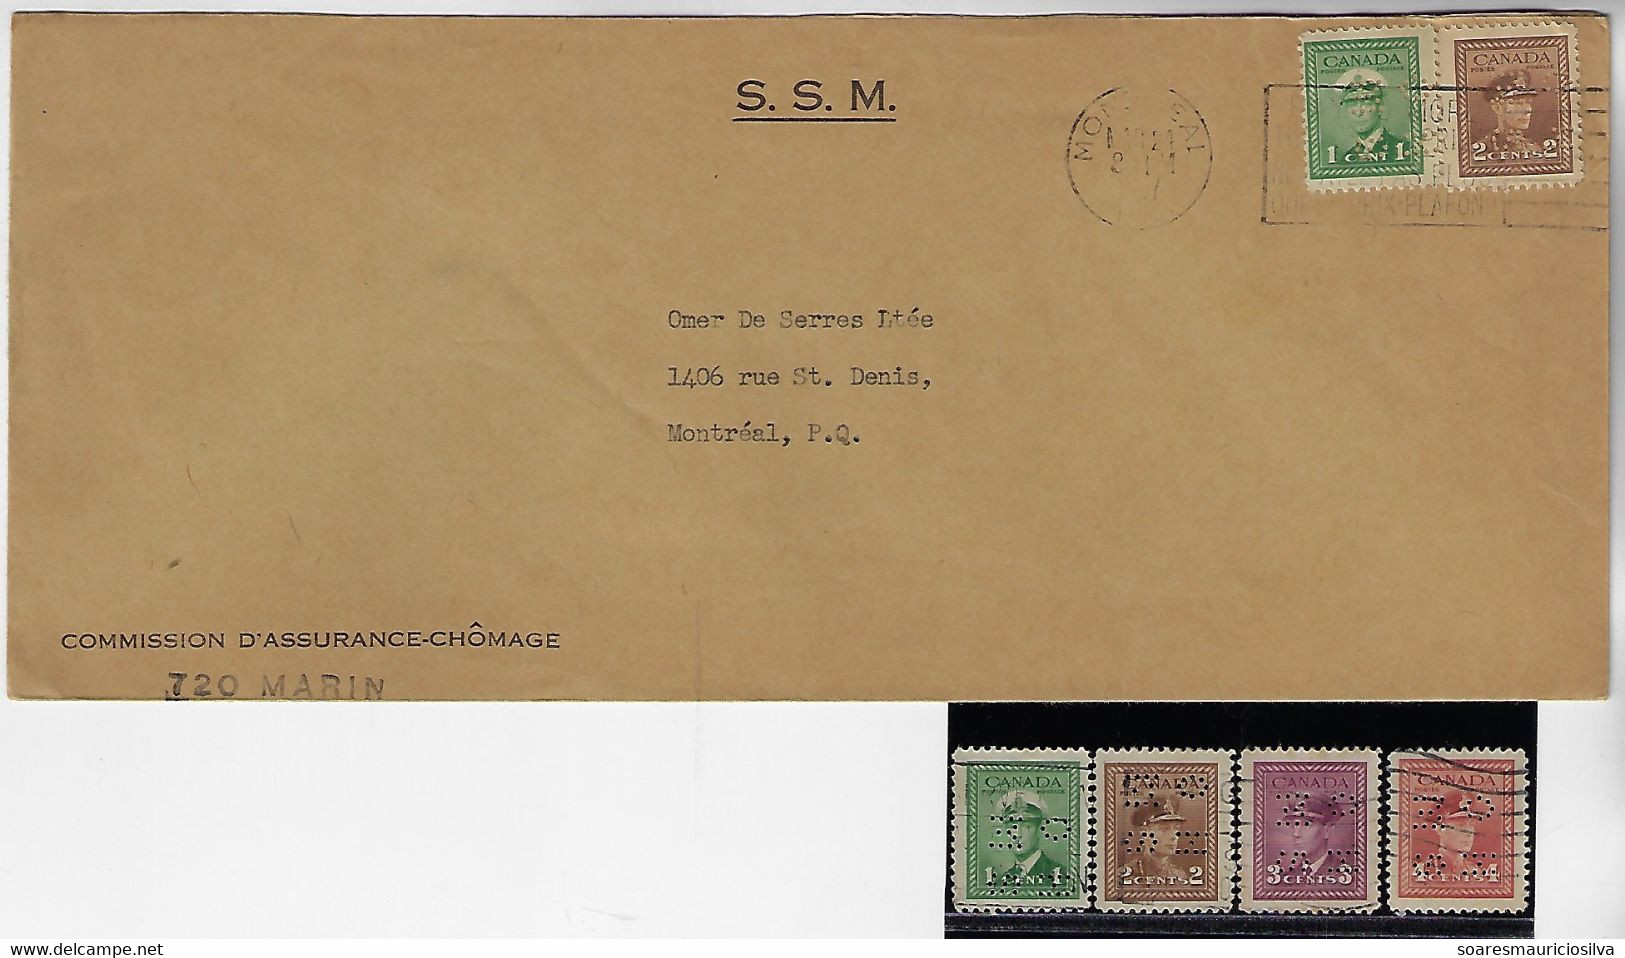 Canada 1947 Cover S.S.M. Unemployment Insurance Commission Perfin OH/MS On Her/His Majesty 's Service + 4 Stamp - Perforiert/Gezähnt